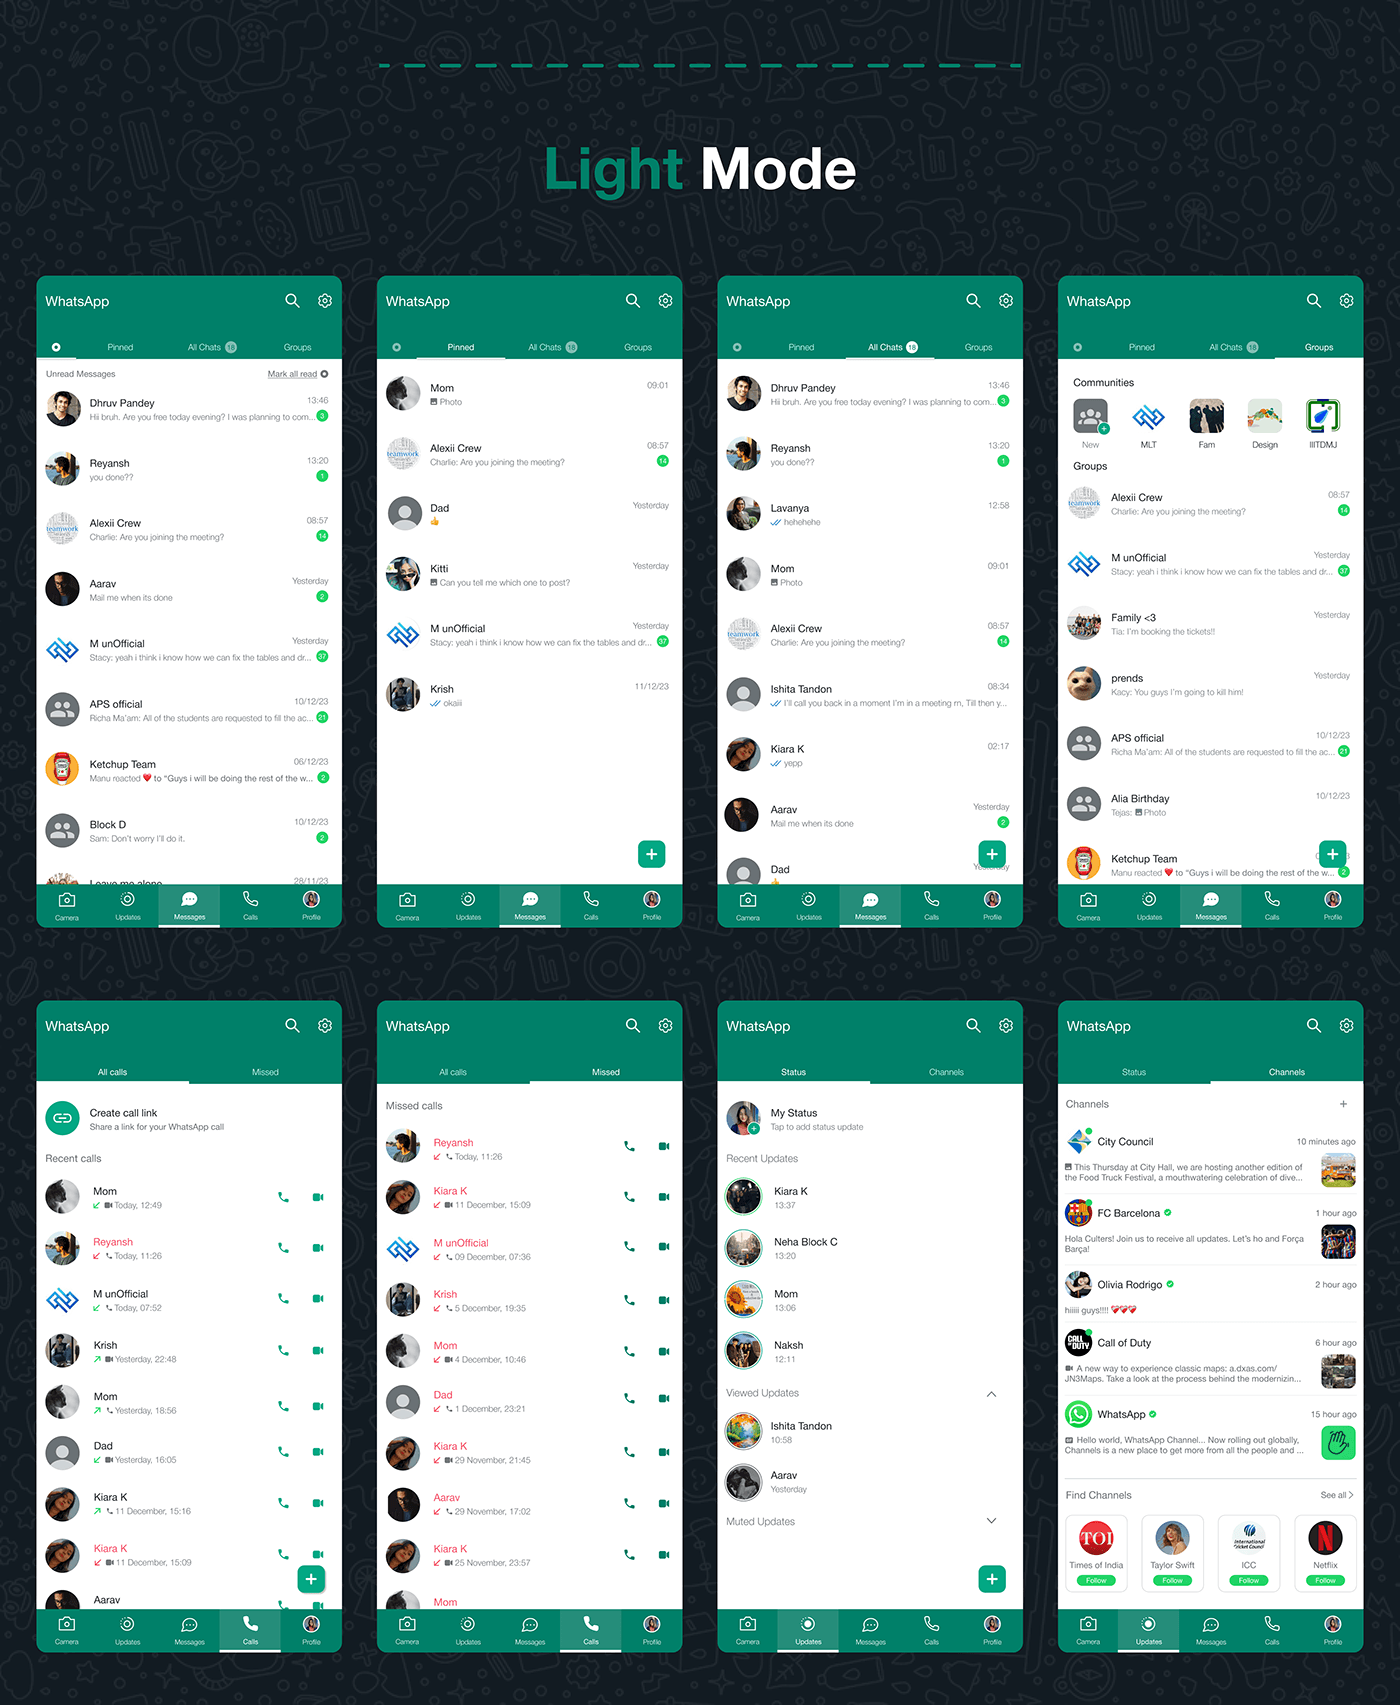 UI/UX WhatsApp Redesign WhatsApp ui redesign ux redesign user interface user experience user interface design ux UI